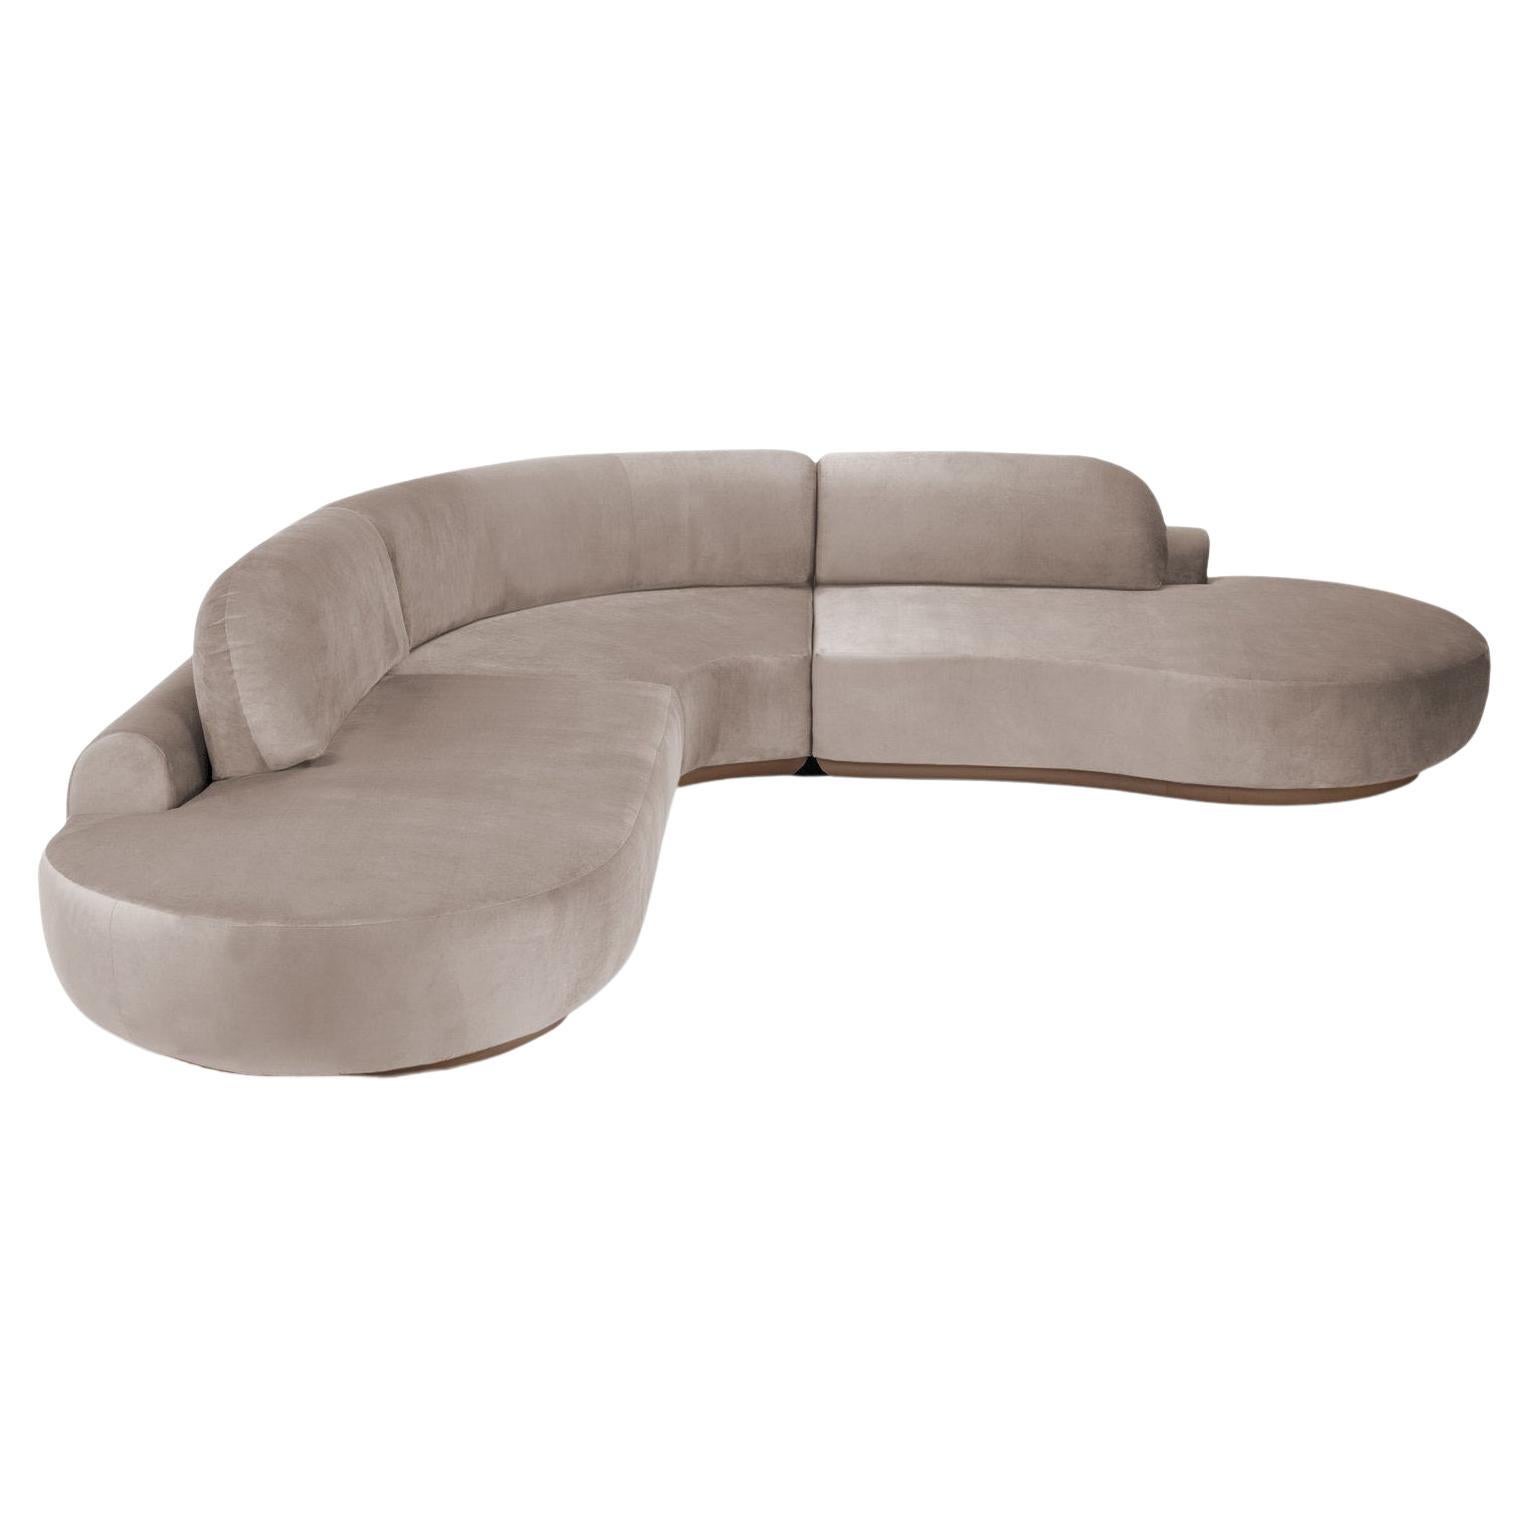 Naked Curved Sectional Sofa, 3 Piece with Beech Ash-056-1 and Paris Mouse For Sale